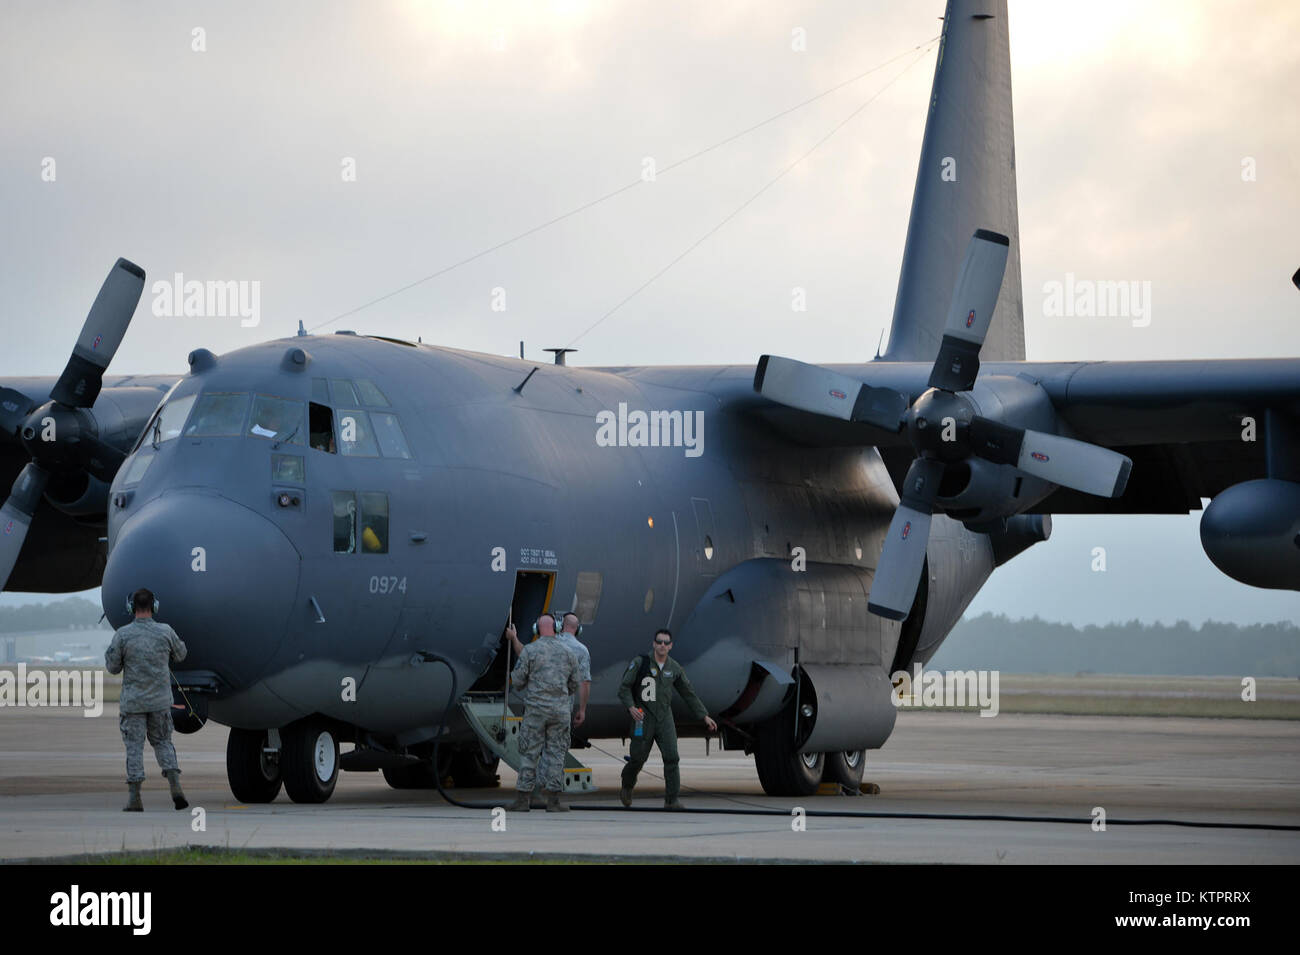 A New York Air National Guard HC-130 Hercules aircraft with the 102nd Rescue Squadron, 106th Rescue Wing lands at the Combat Readiness Training Center in Gulfport, Miss., during Exercise Southern Strike 16, Nov. 5, 2015.  The exercise emphasizes air-to-air, air-to-ground and special forces training opportunities.  (New York Air National Guard / Staff Sergeant Christopher S Muncy / released) Stock Photo